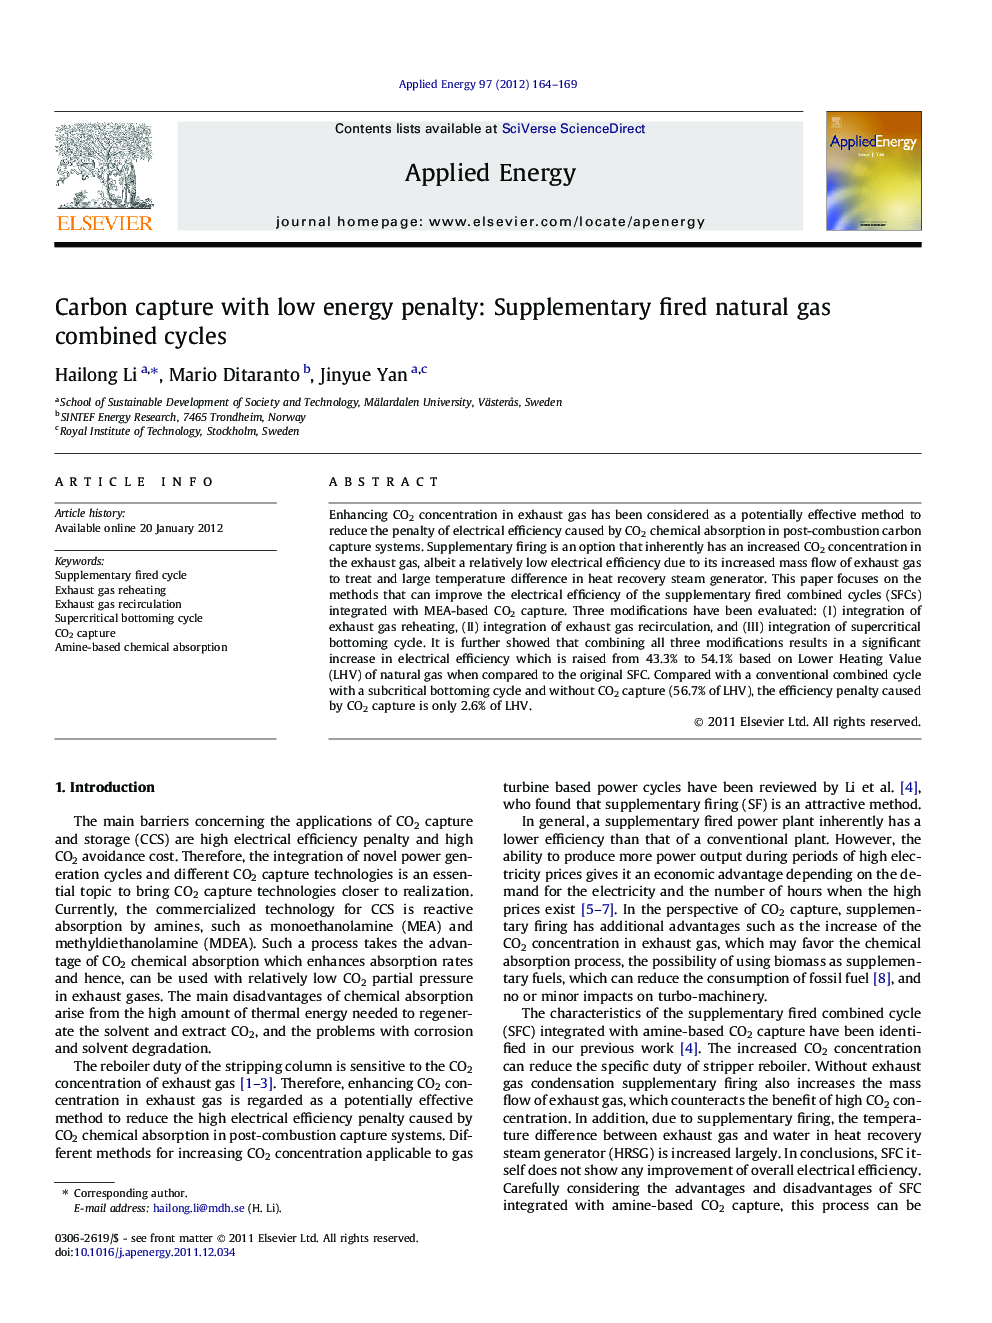 Carbon capture with low energy penalty: Supplementary fired natural gas combined cycles